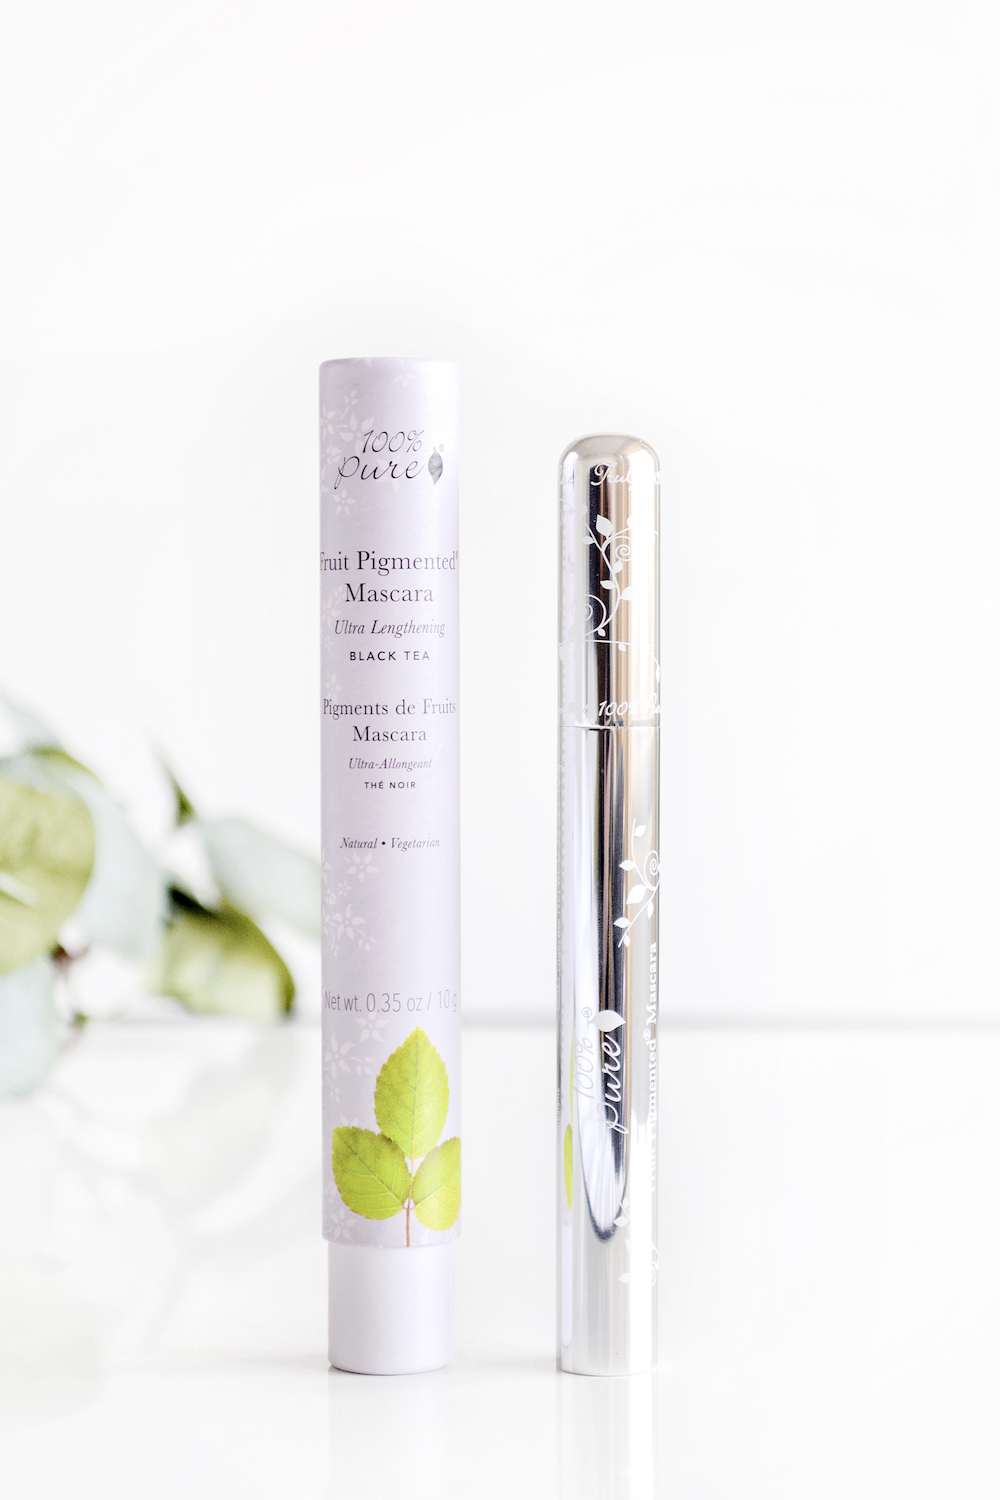 Review of 100% PURE Fruit Pigmented Ultra Lengthening Mascara - a natural, cruelty-free and water resistant mascara for lengthened lashes.